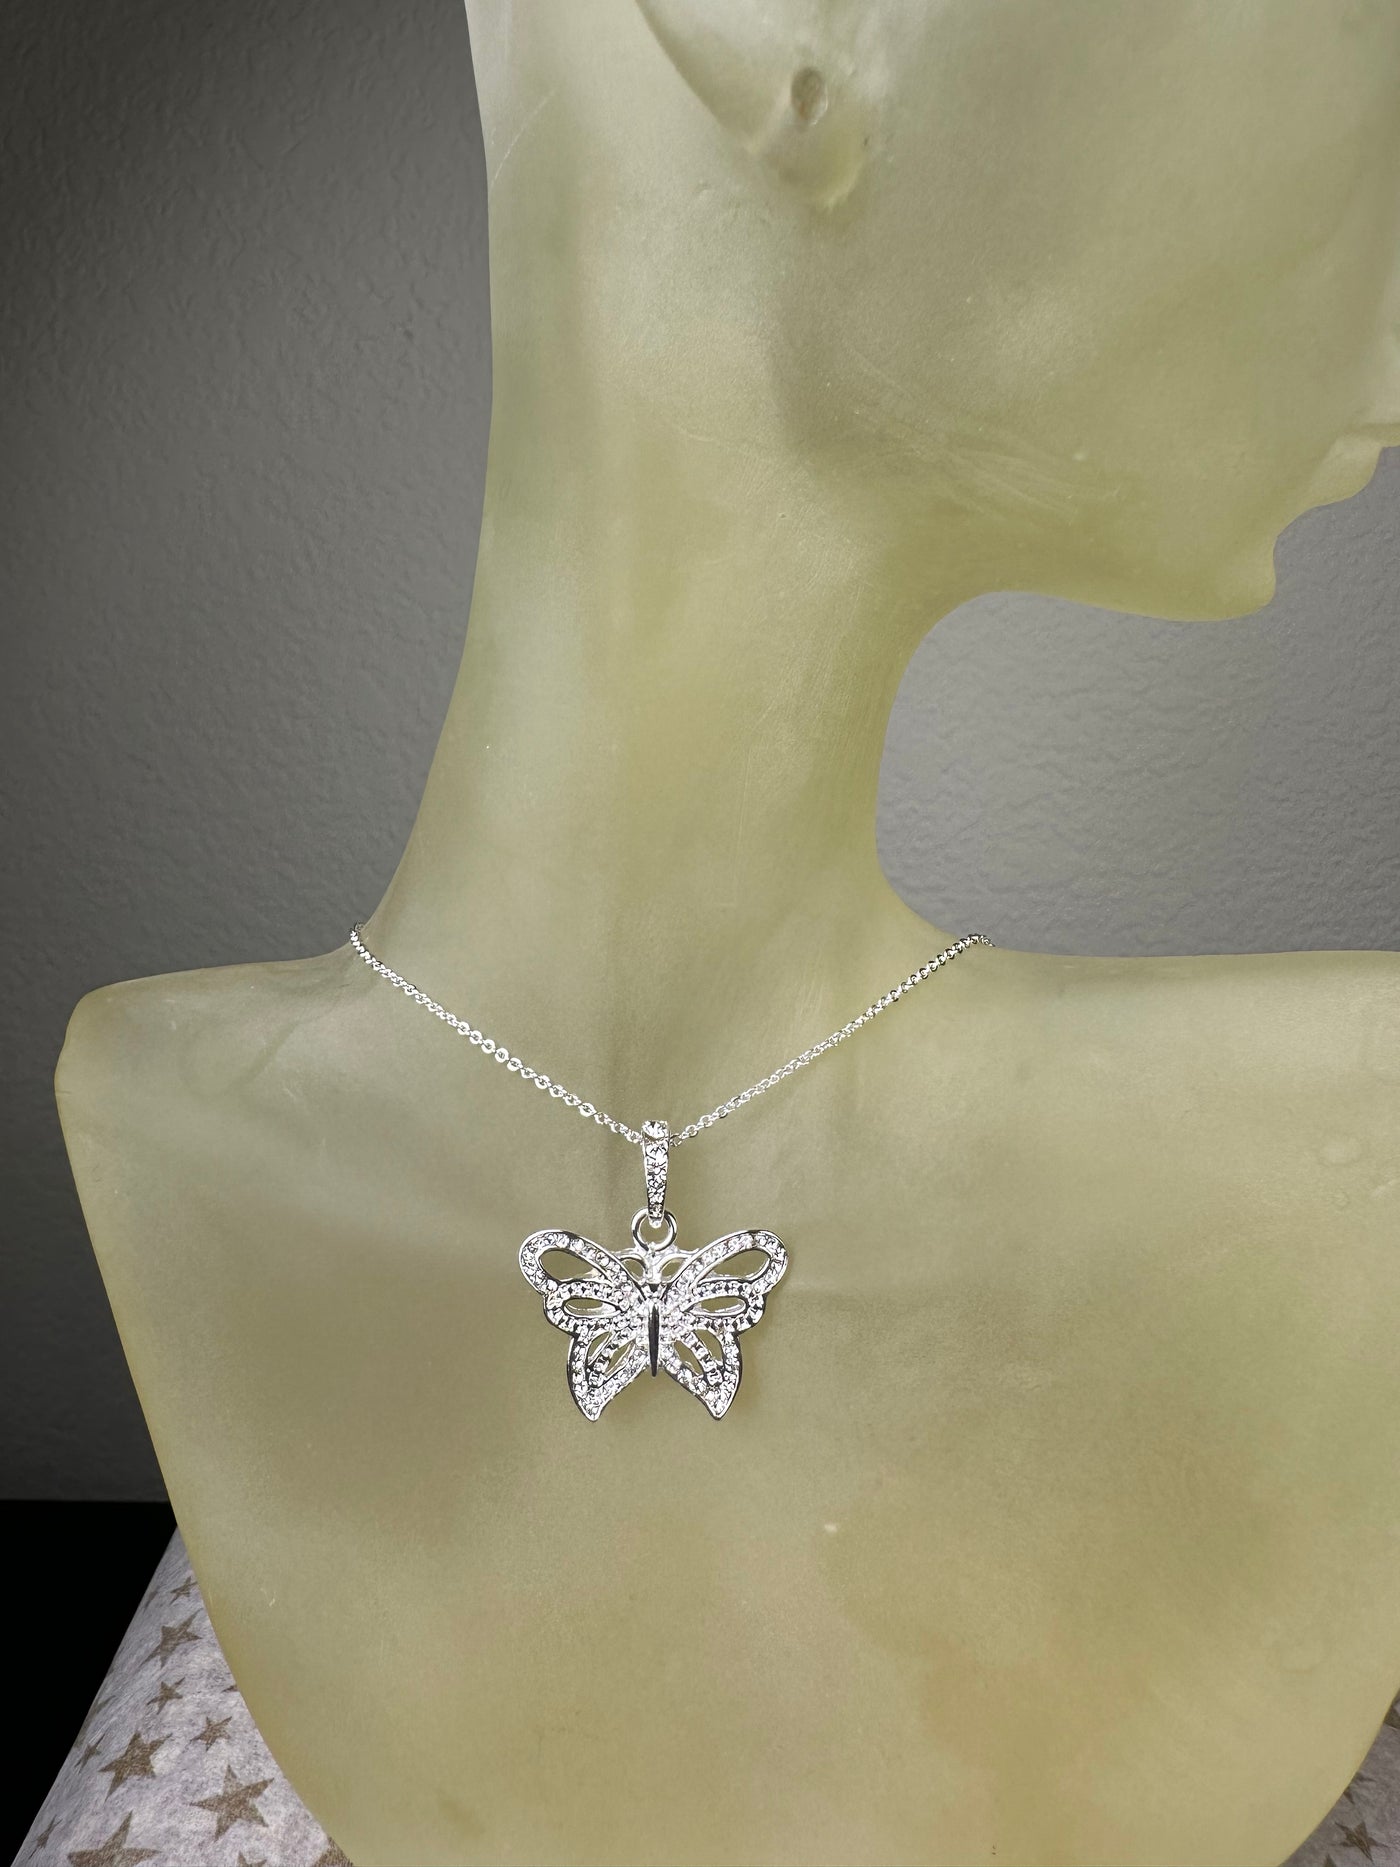 Silver Tone Crystal Butterfly Pendant Necklace